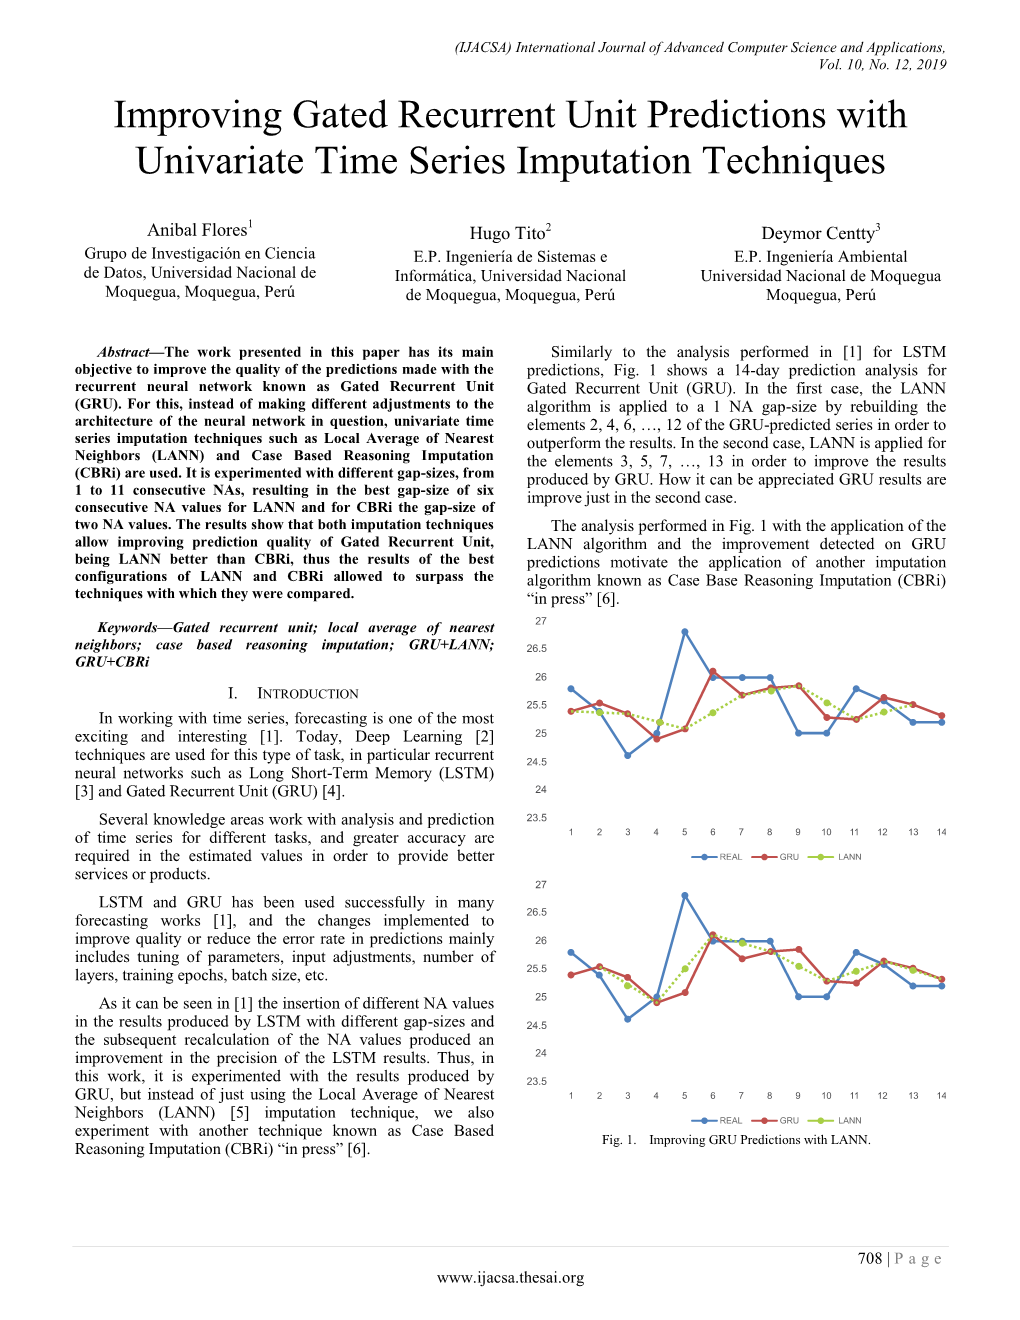 Improving Gated Recurrent Unit Predictions with Univariate Time Series Imputation Techniques